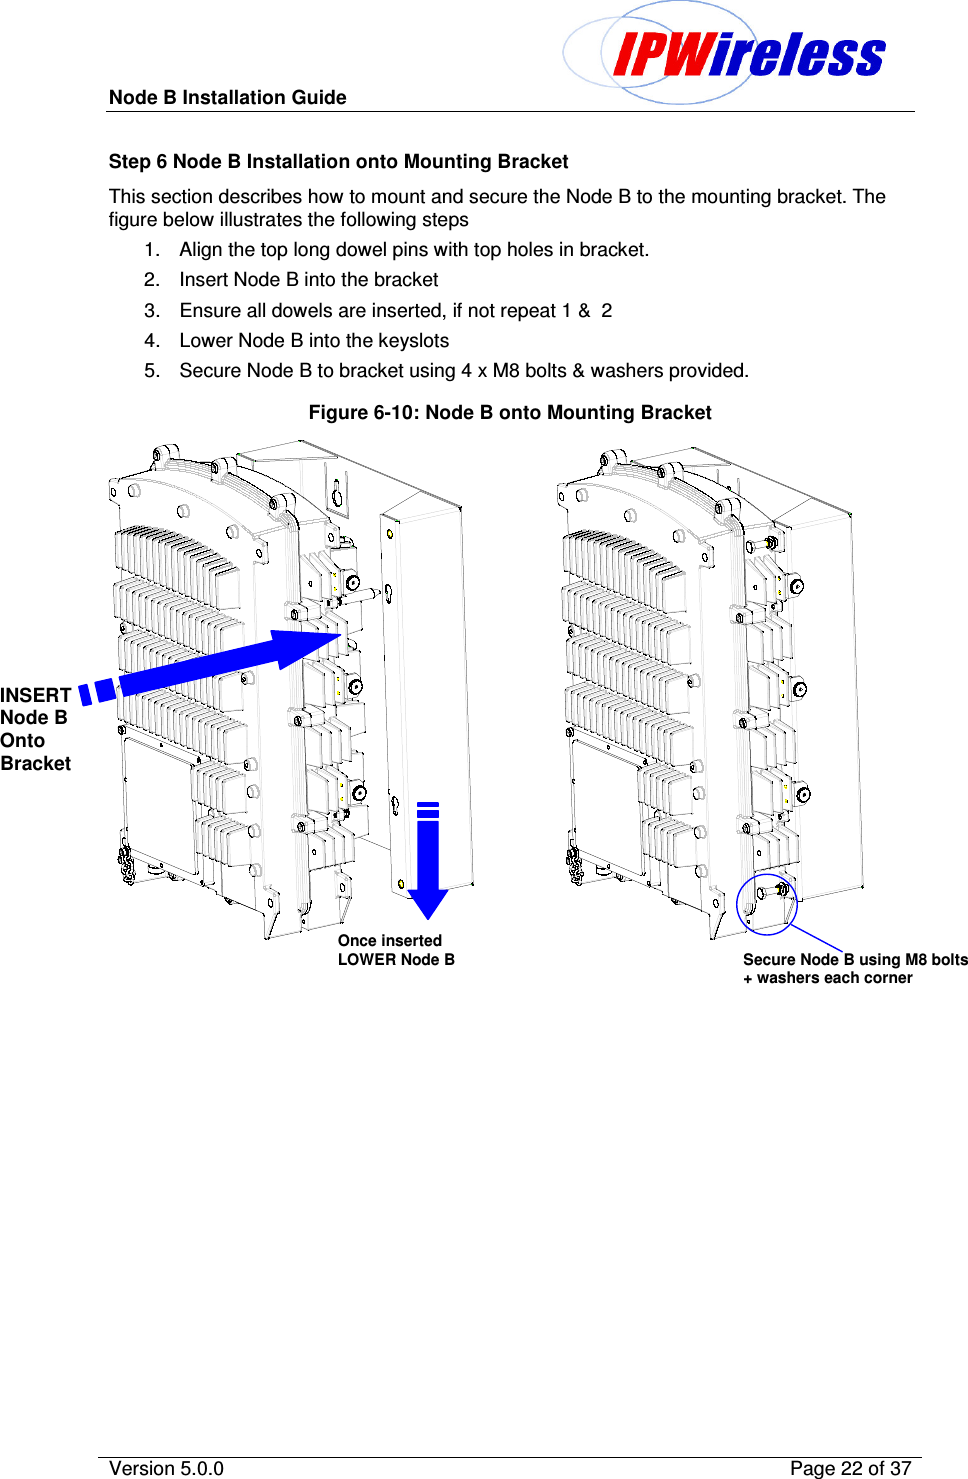 Node B Installation Guide                                              Version 5.0.0    Page 22 of 37  Step 6 Node B Installation onto Mounting Bracket This section describes how to mount and secure the Node B to the mounting bracket. The figure below illustrates the following steps 1.  Align the top long dowel pins with top holes in bracket. 2.  Insert Node B into the bracket 3.  Ensure all dowels are inserted, if not repeat 1 &amp;  2 4.  Lower Node B into the keyslots 5.  Secure Node B to bracket using 4 x M8 bolts &amp; washers provided. Figure 6-10: Node B onto Mounting Bracket                 INSERT Node B Onto Bracket Once inserted LOWER Node B Secure Node B using M8 bolts + washers each corner 